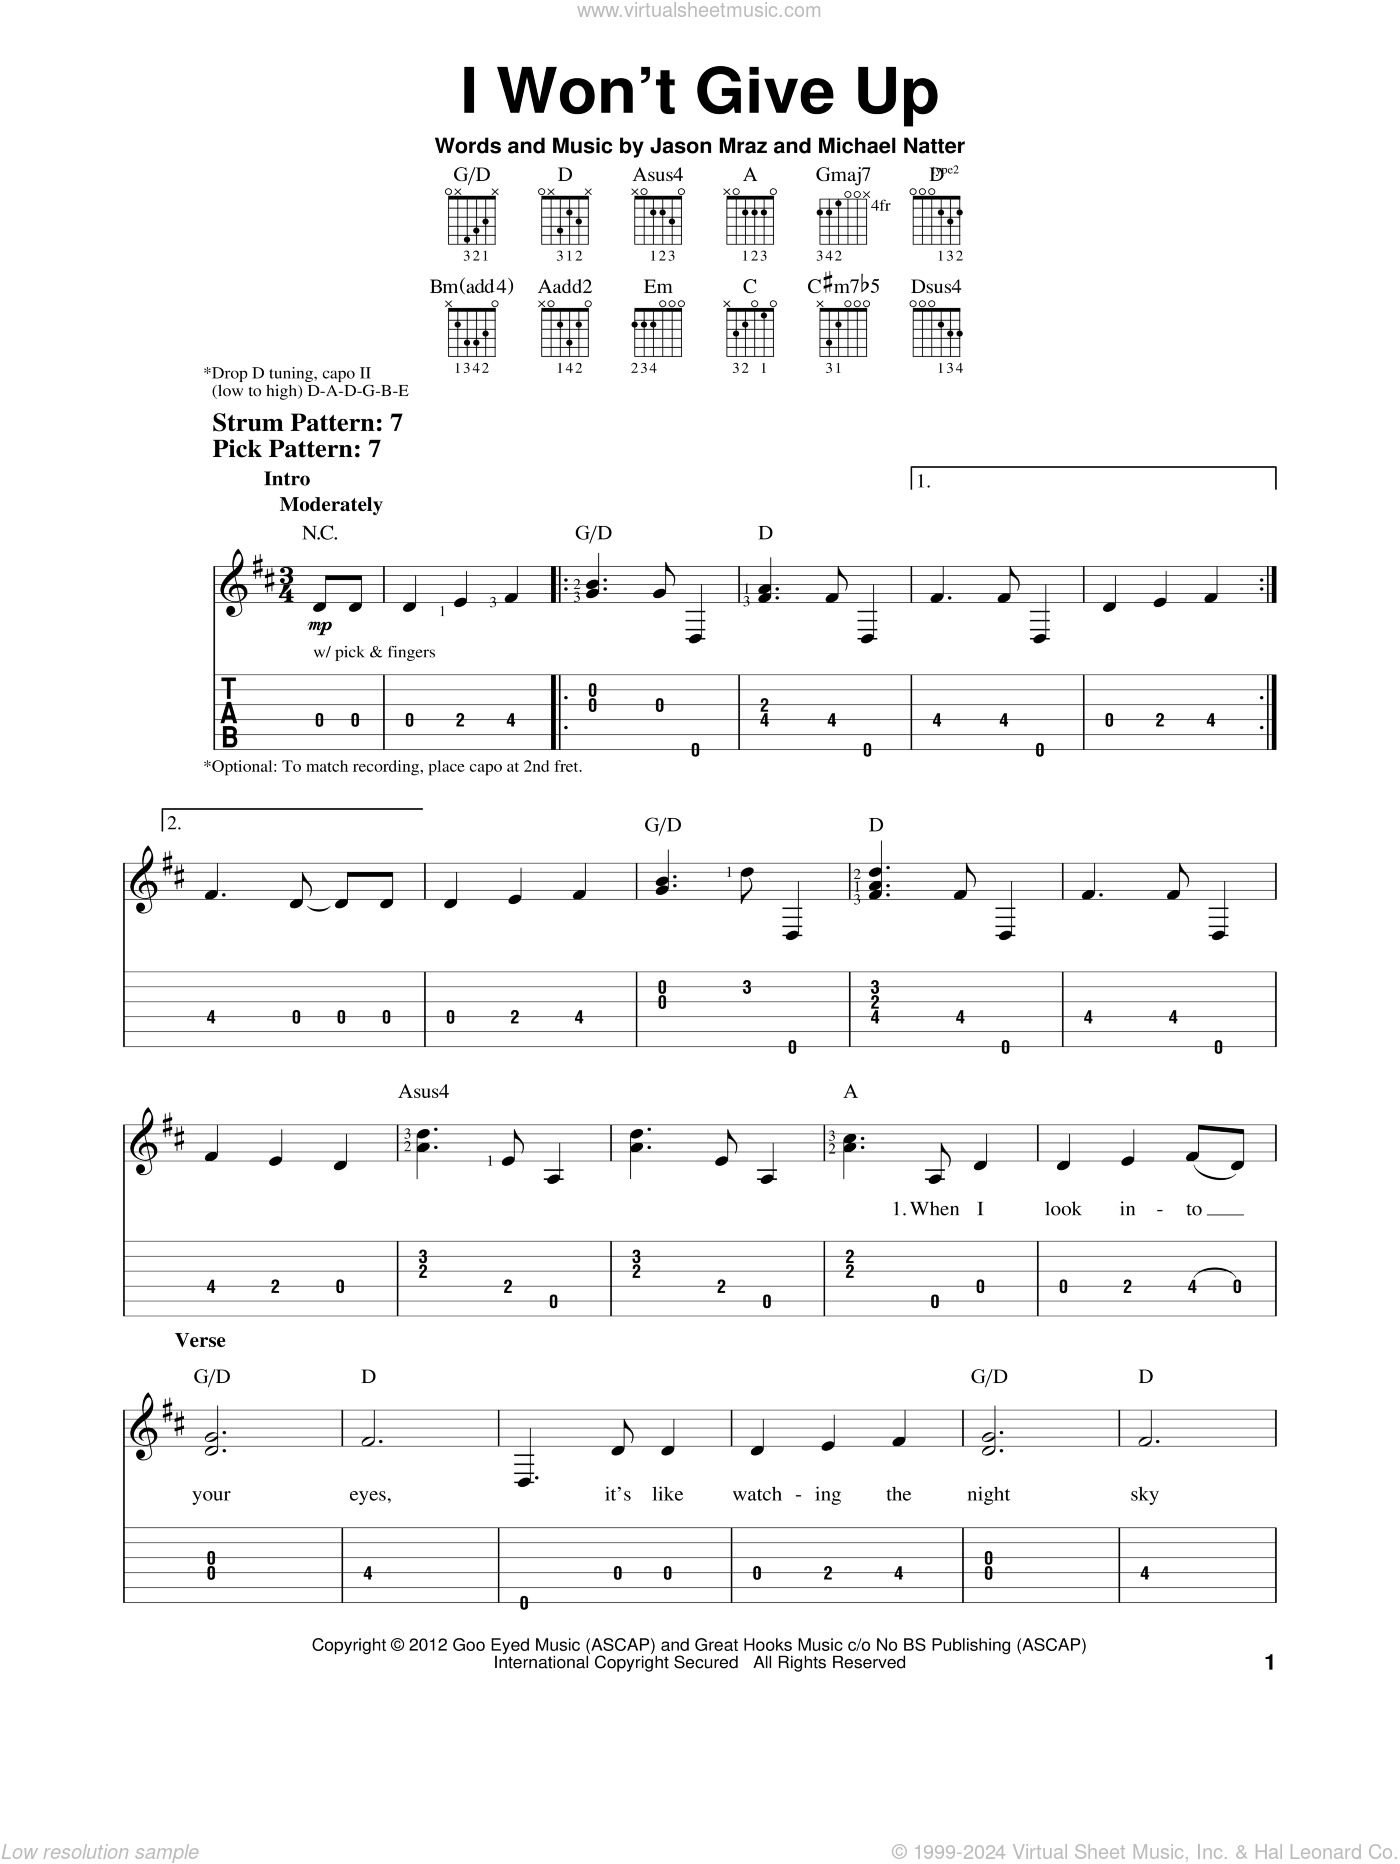 Mraz - I Won't Give Up sheet music for voice, piano or guitar